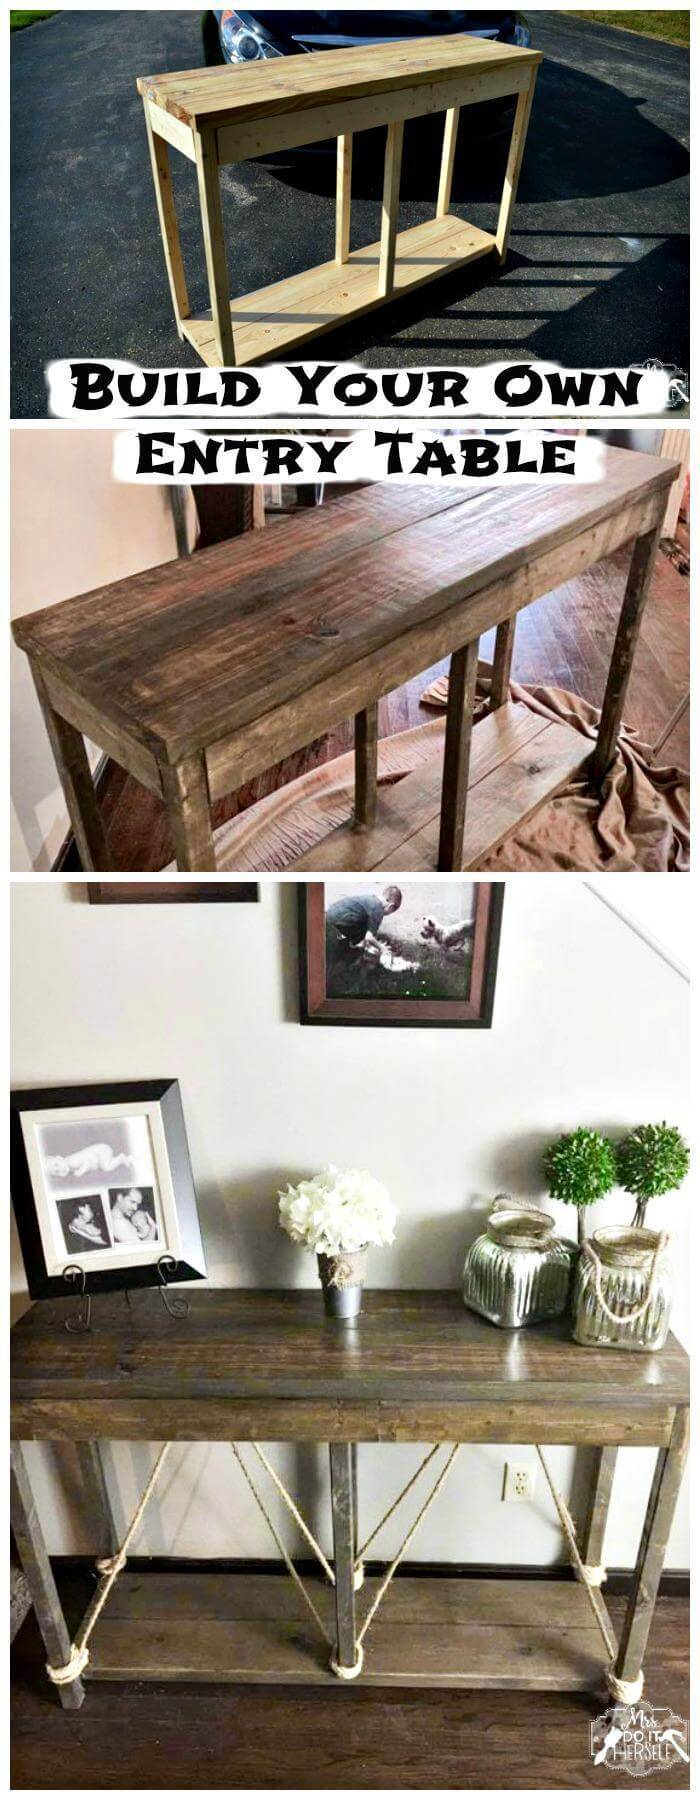 Build Your Own Entry Table